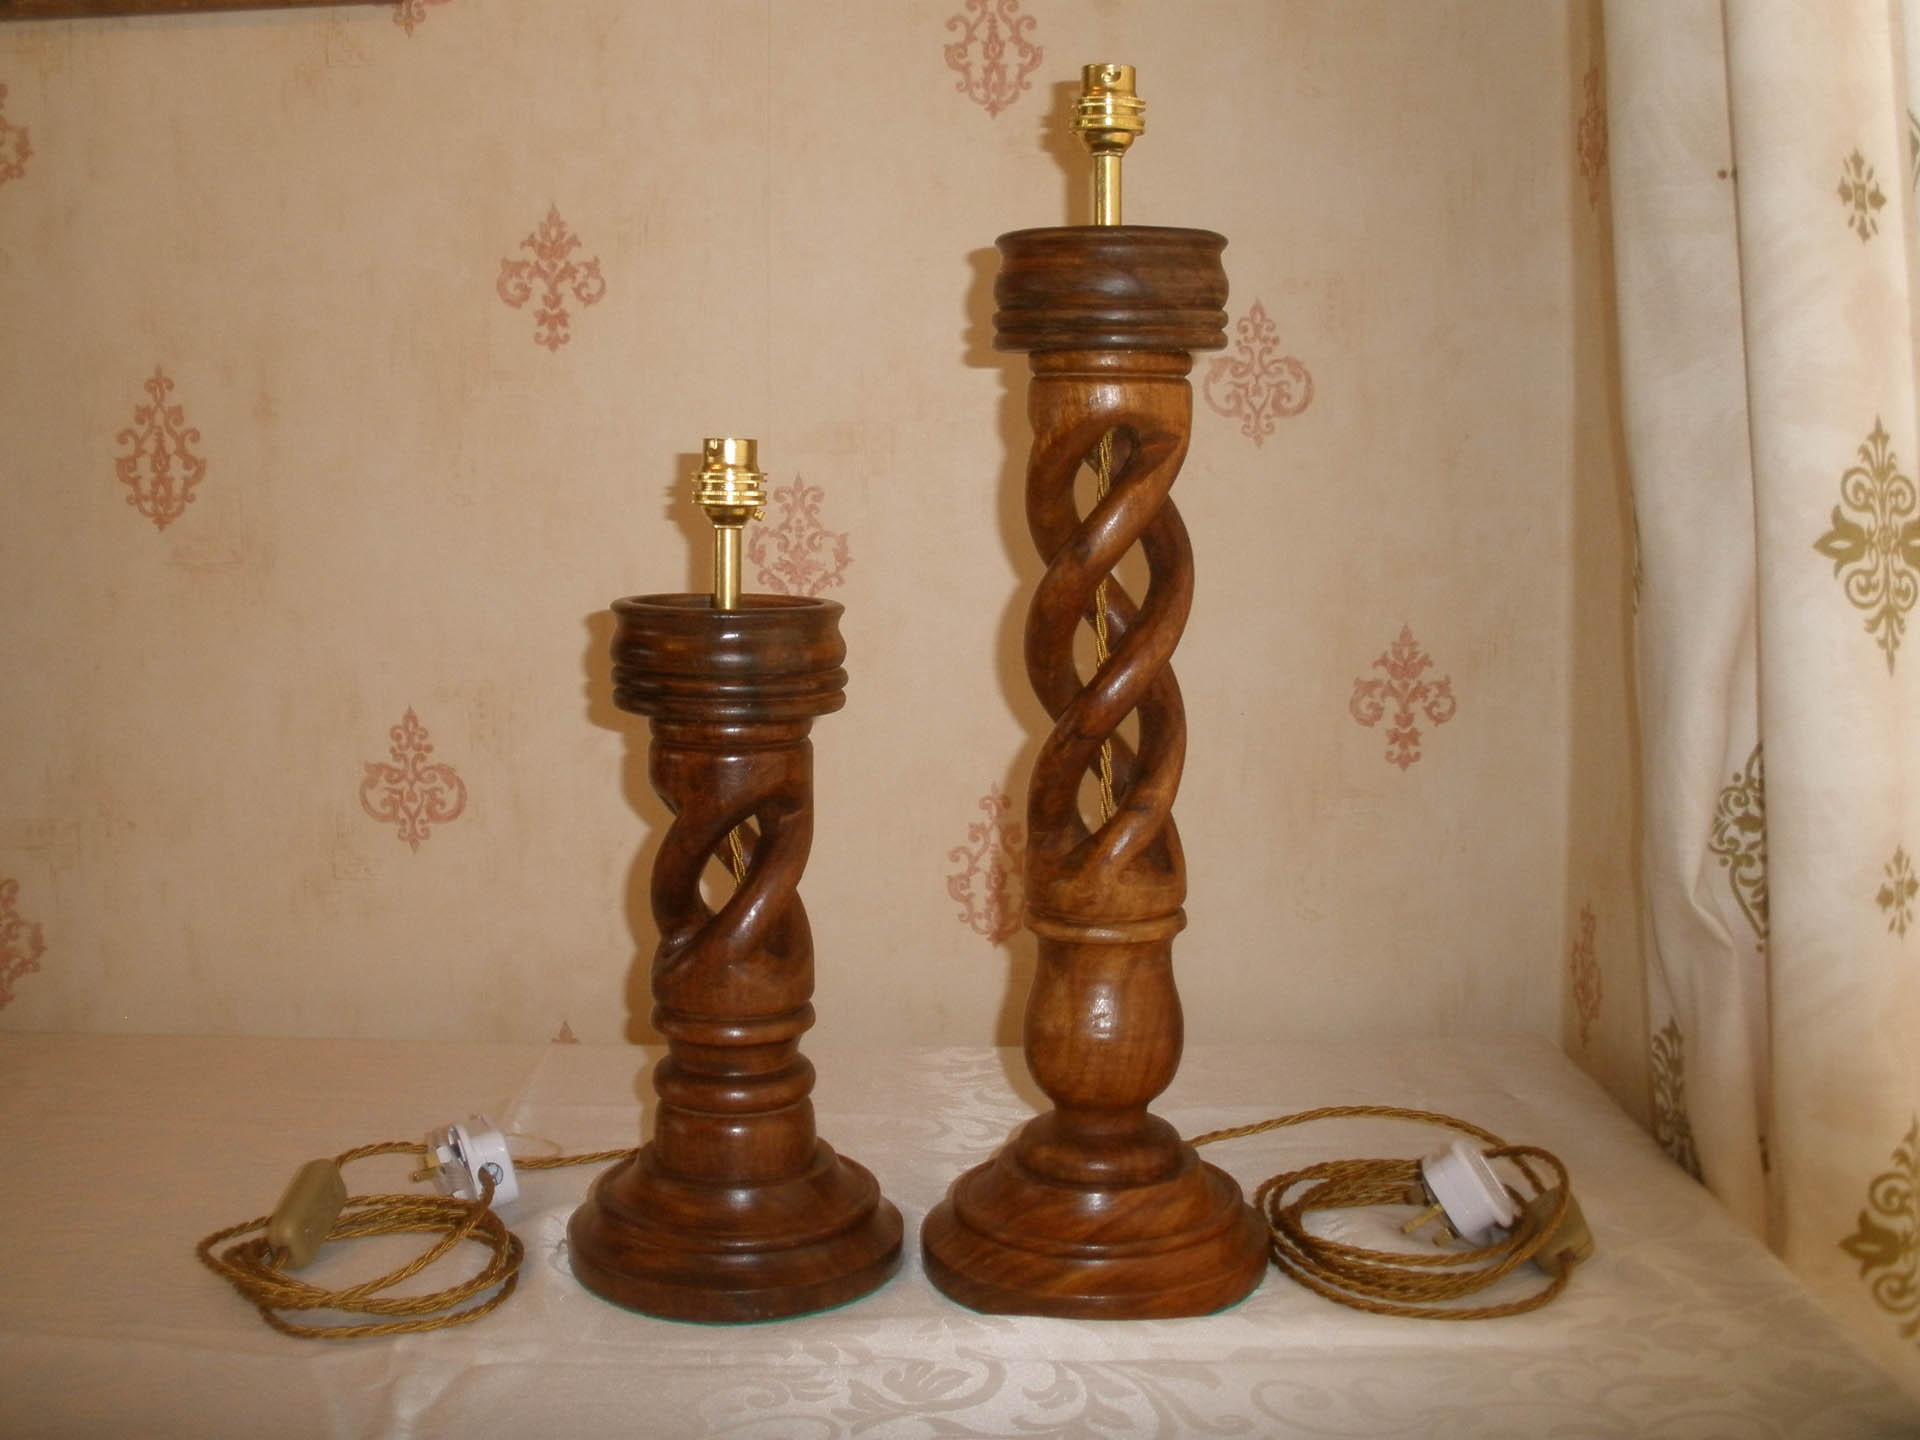 Little and Large Twisted Candlesticks